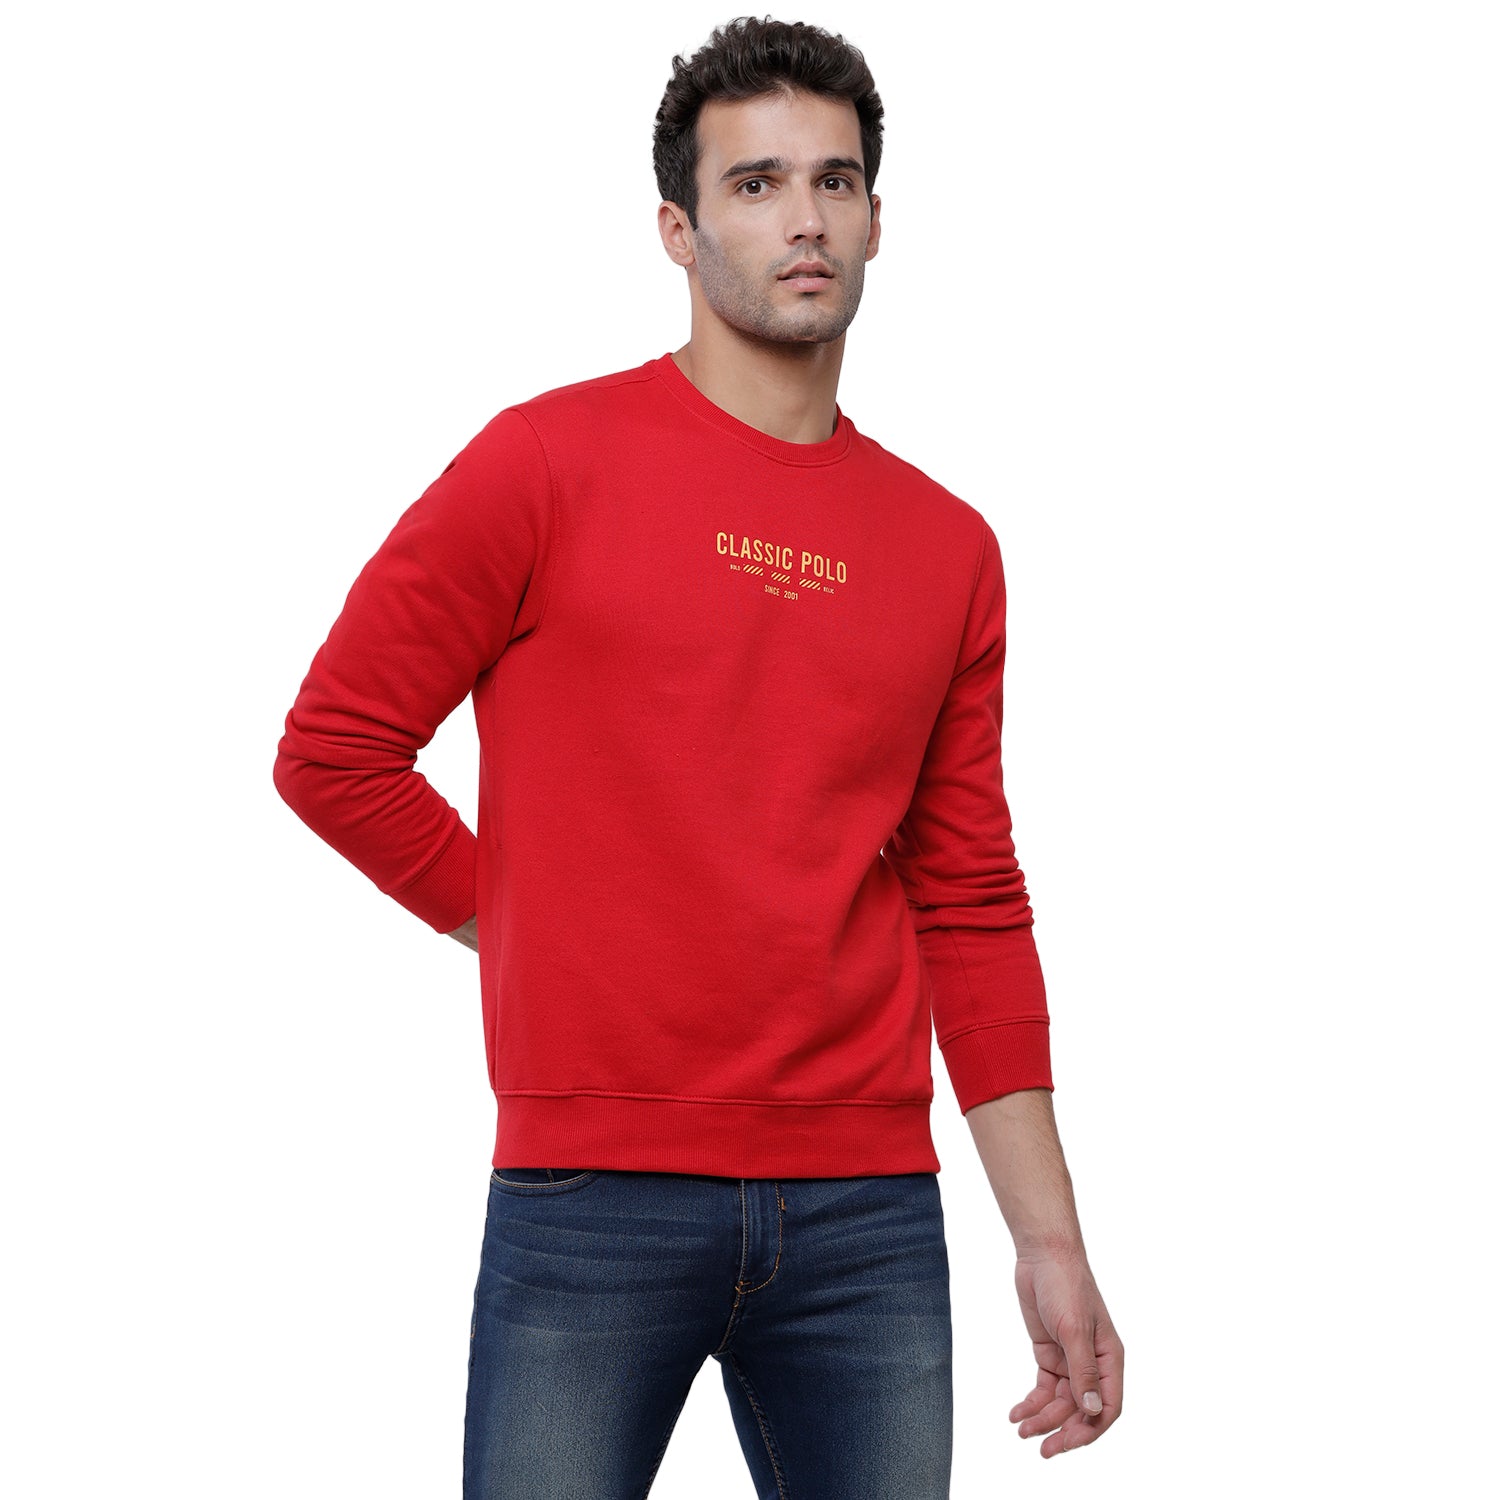 Classic Polo Men's Solid Full Sleeve Red Sweat Shirt - CPSS-347 B Sweat Shirts Classic Polo 